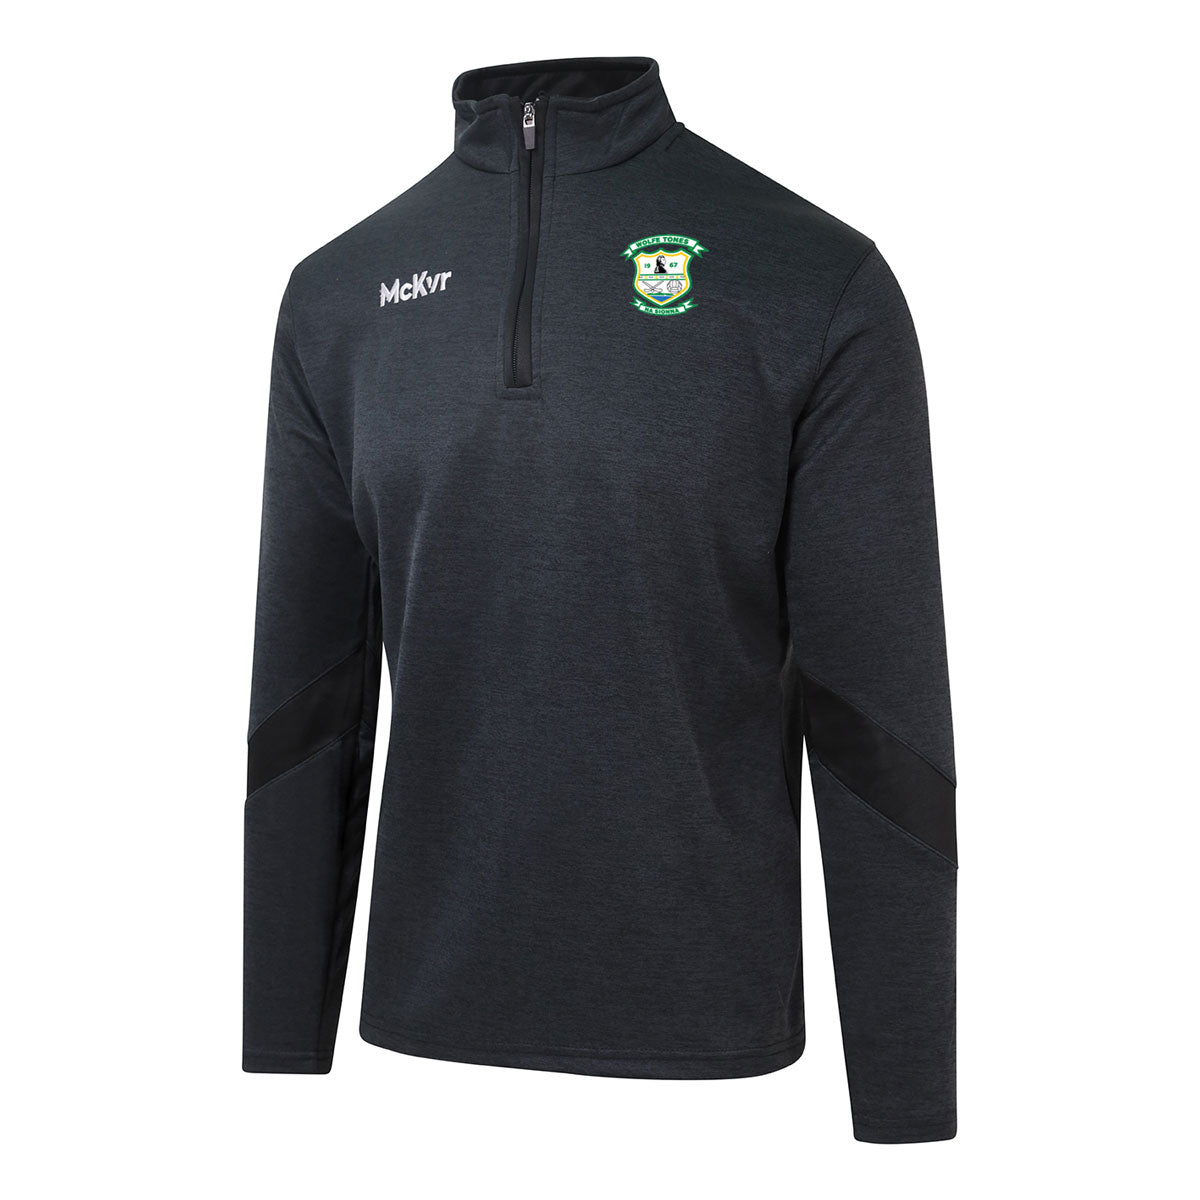 Mc Keever Wolfe Tones Na Sionna, Clare Core 22 1/4 Zip Top - Youth - Black